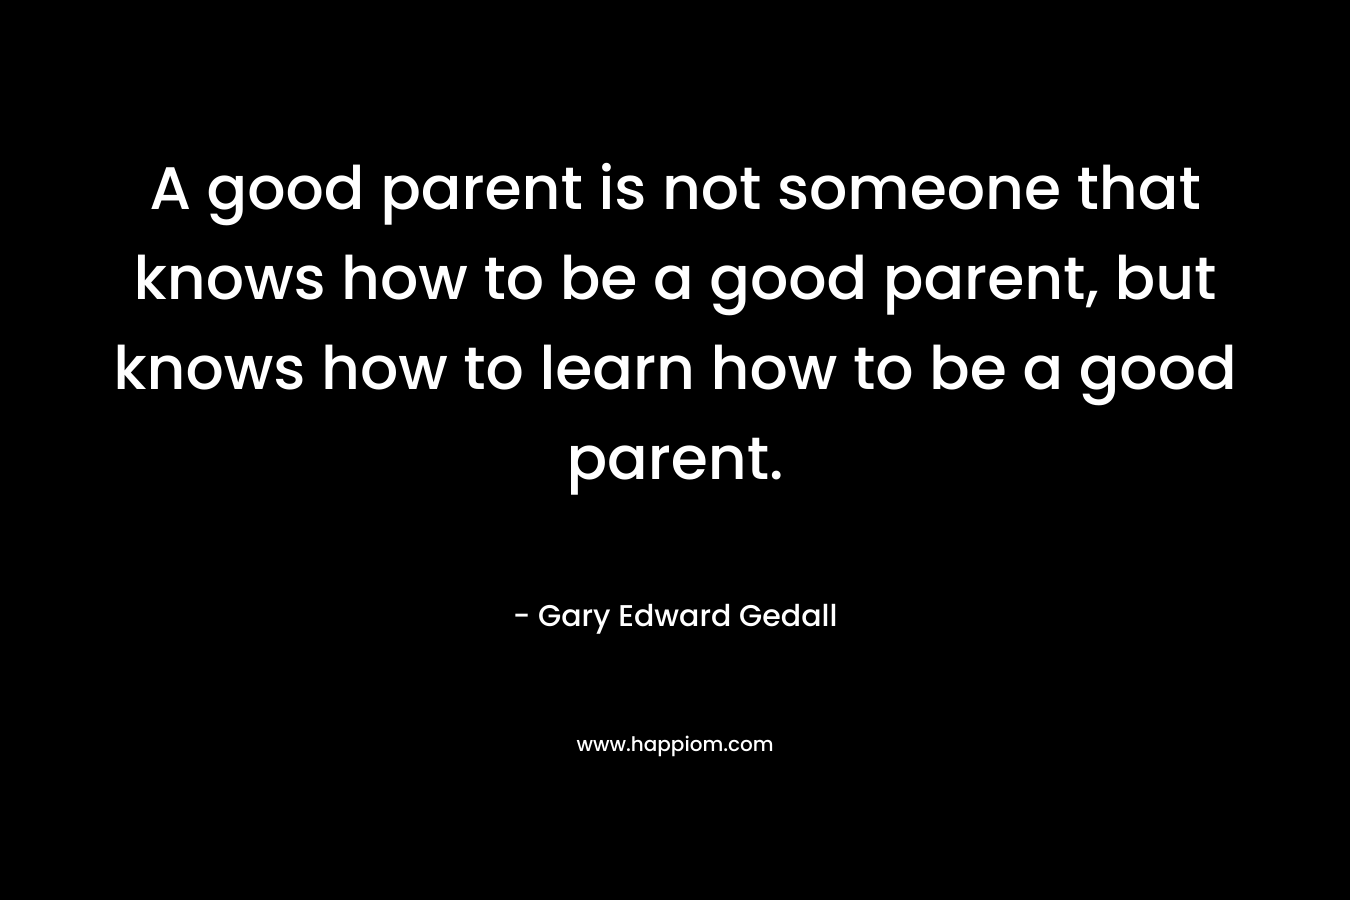 A good parent is not someone that knows how to be a good parent, but knows how to learn how to be a good parent.